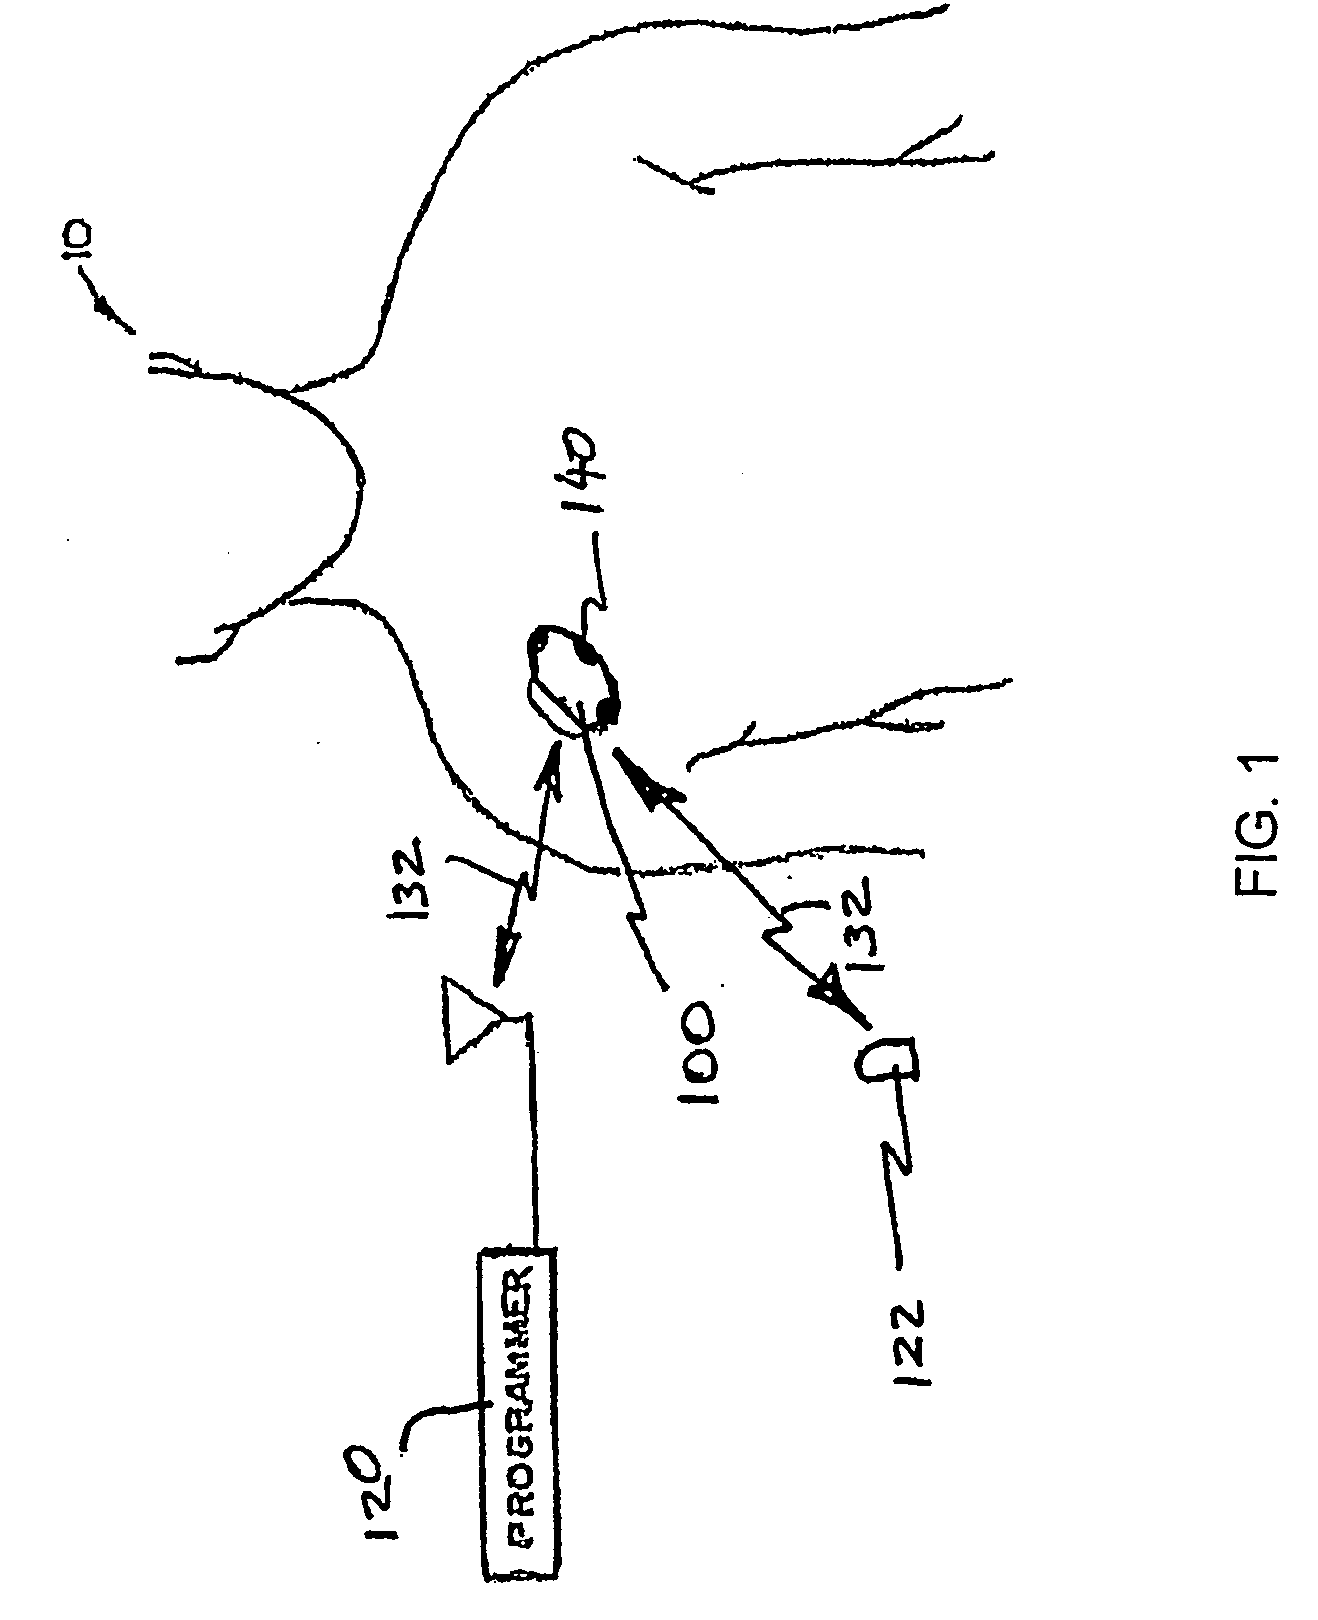 Apparatus for data retention in an implantable medical device